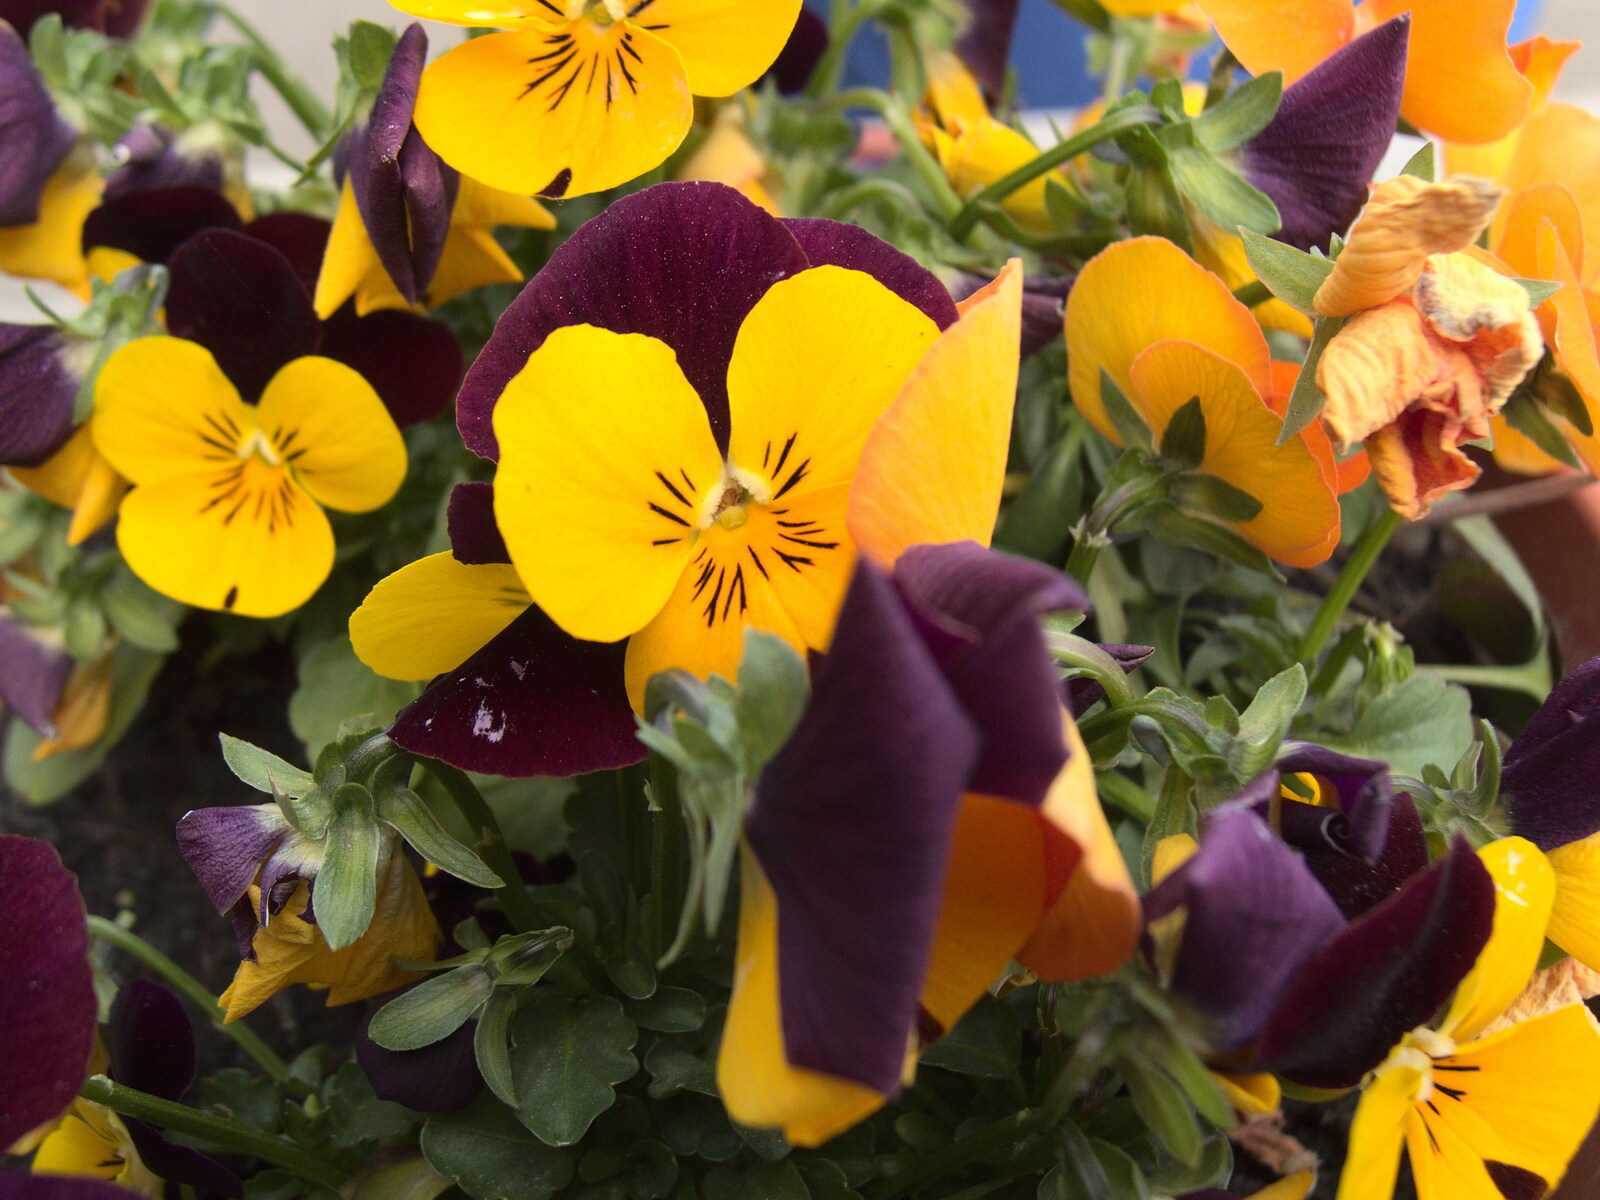 Pansies in a tub from The BSCC Weekend Away, Holt, Norfolk - 12th May 2018